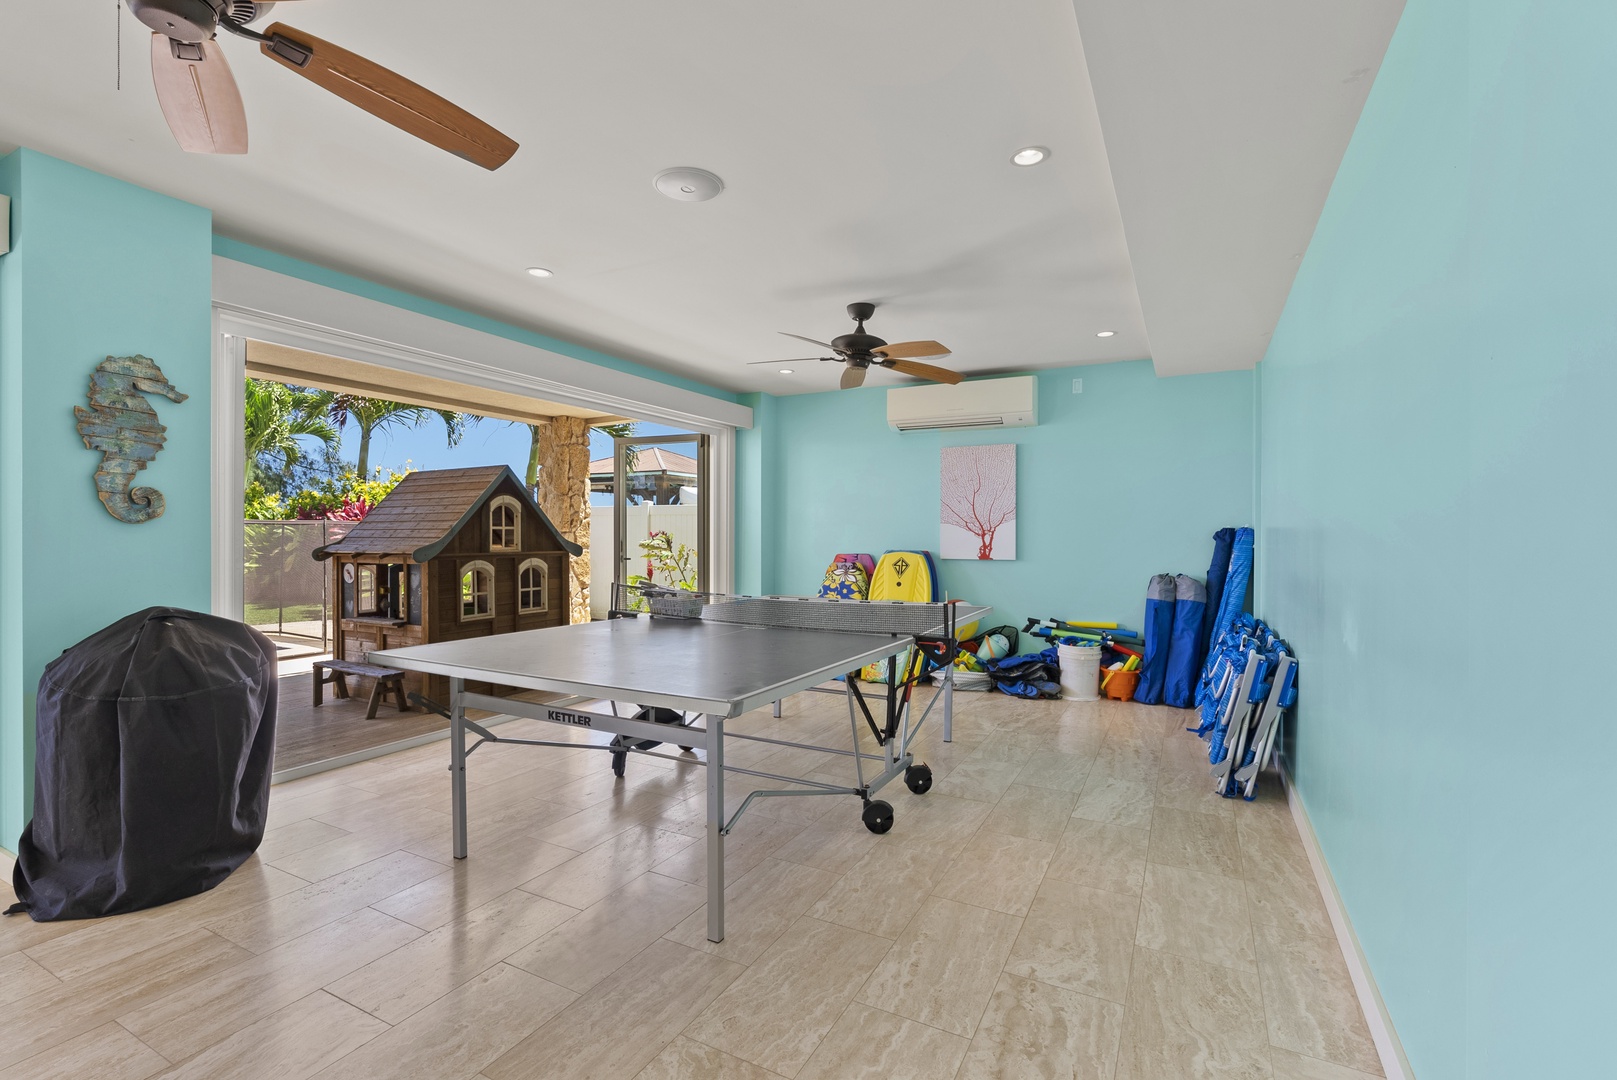 Waialua Vacation Rentals, Kala'iku Estate - Pool House ping pong table is a great idea for an afternoon with friends